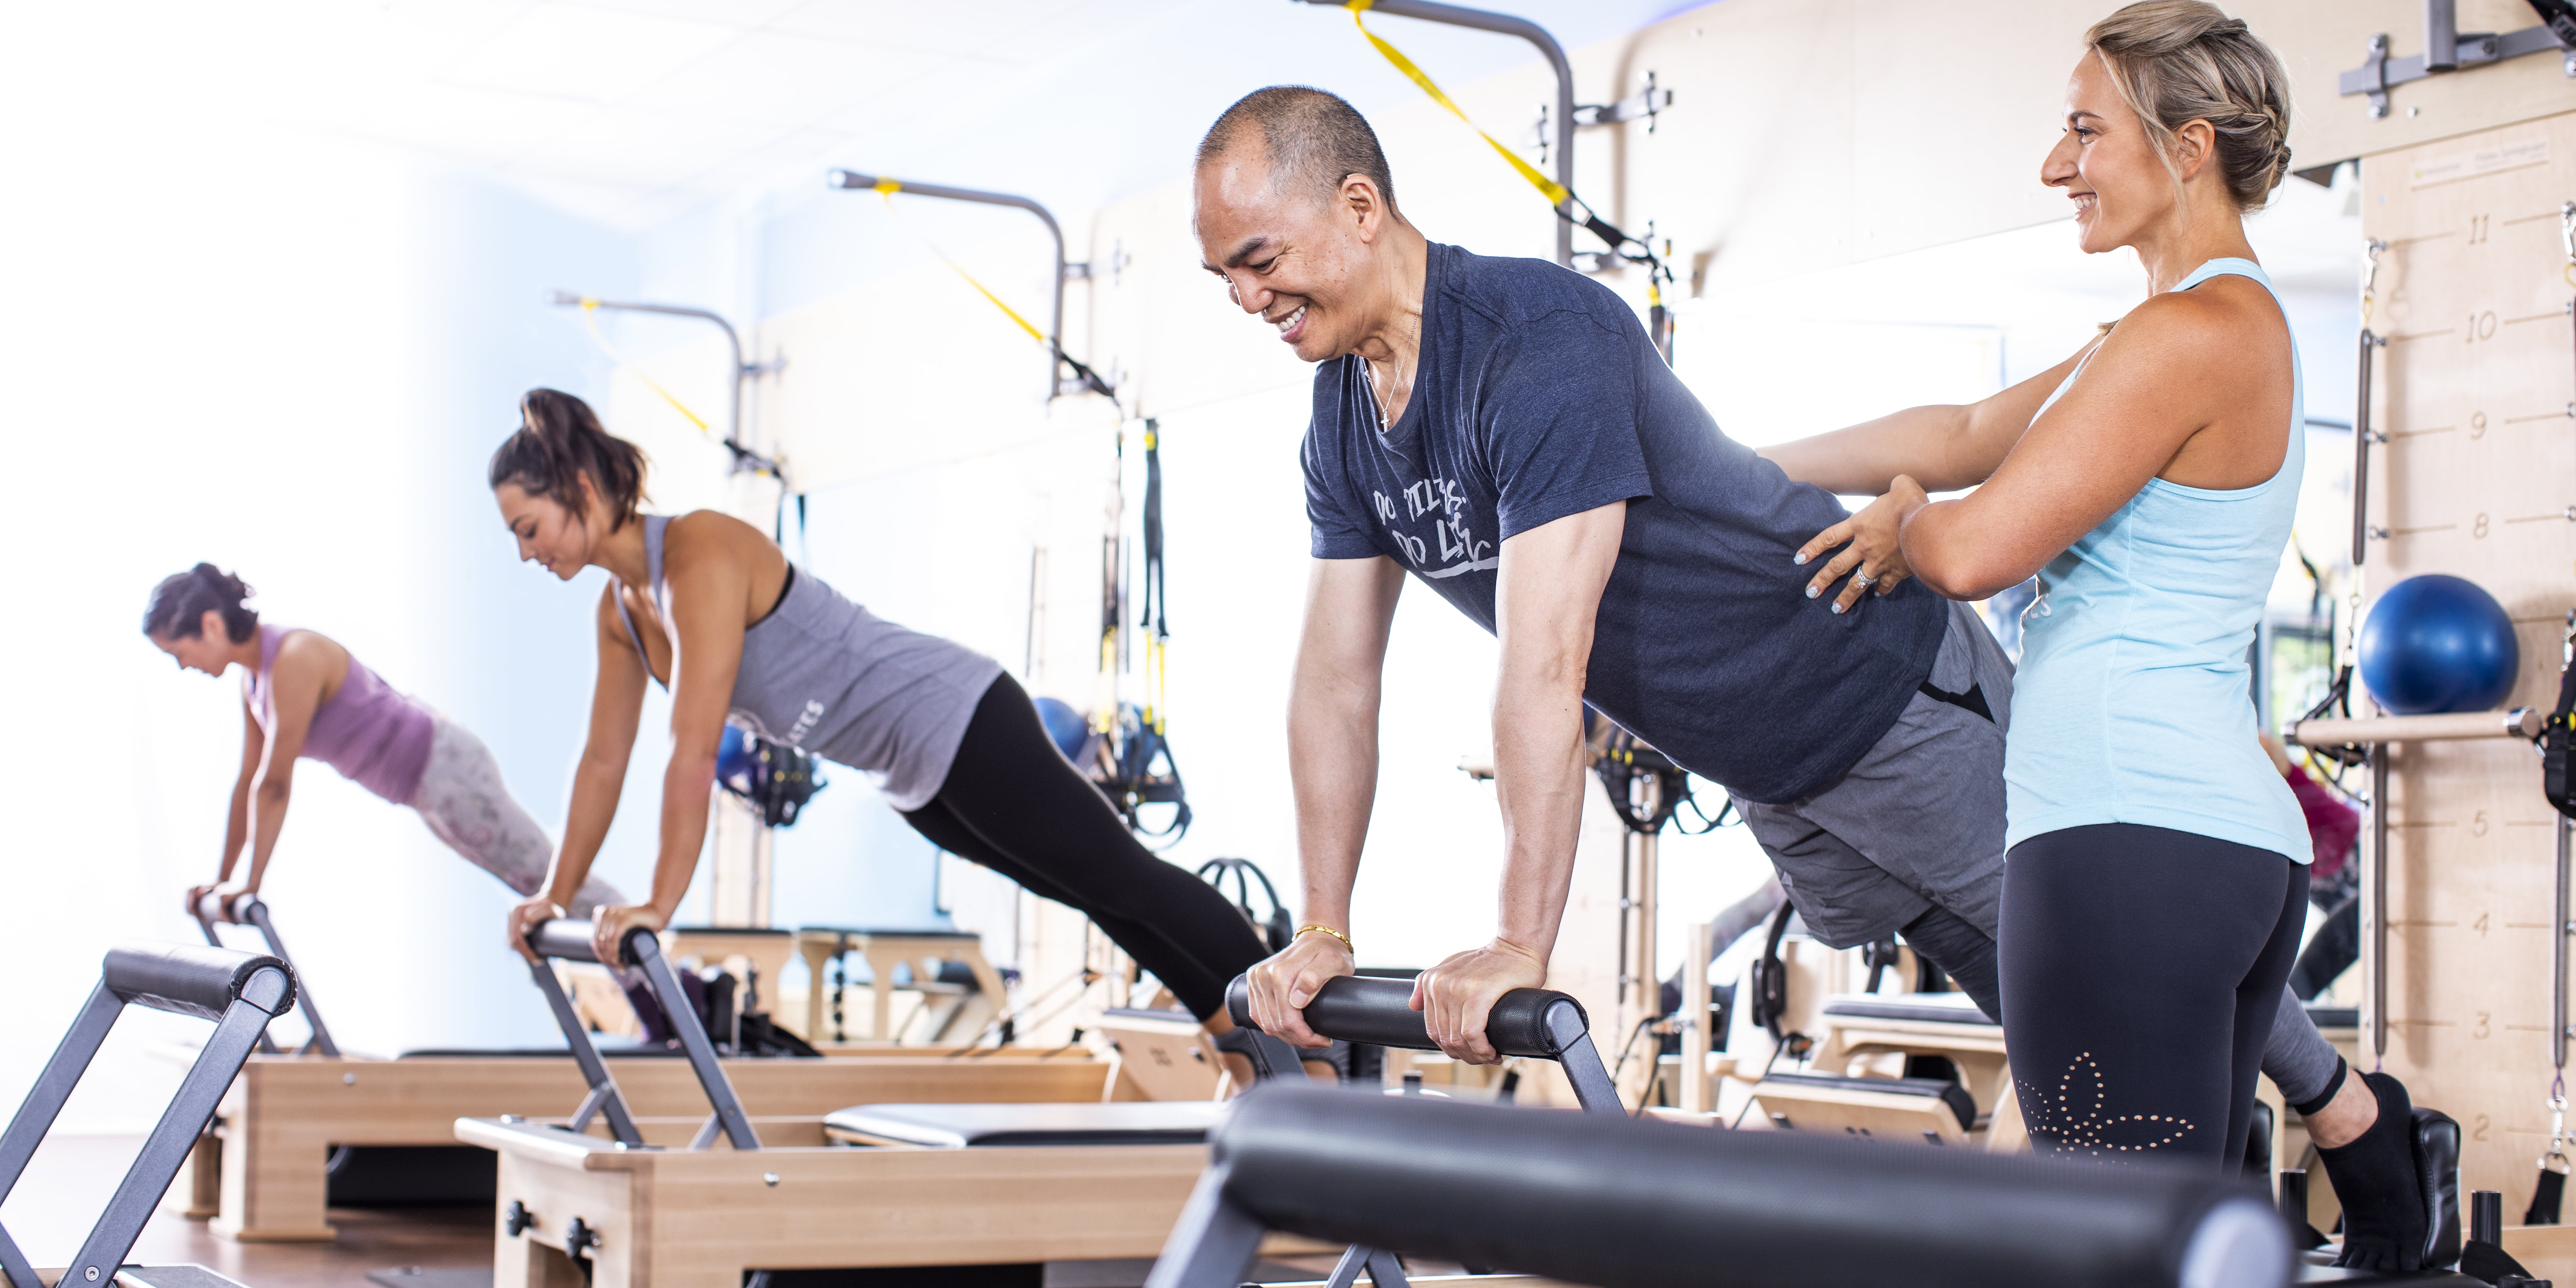 Range Reformer Pilates: Read Reviews and Book Classes on ClassPass